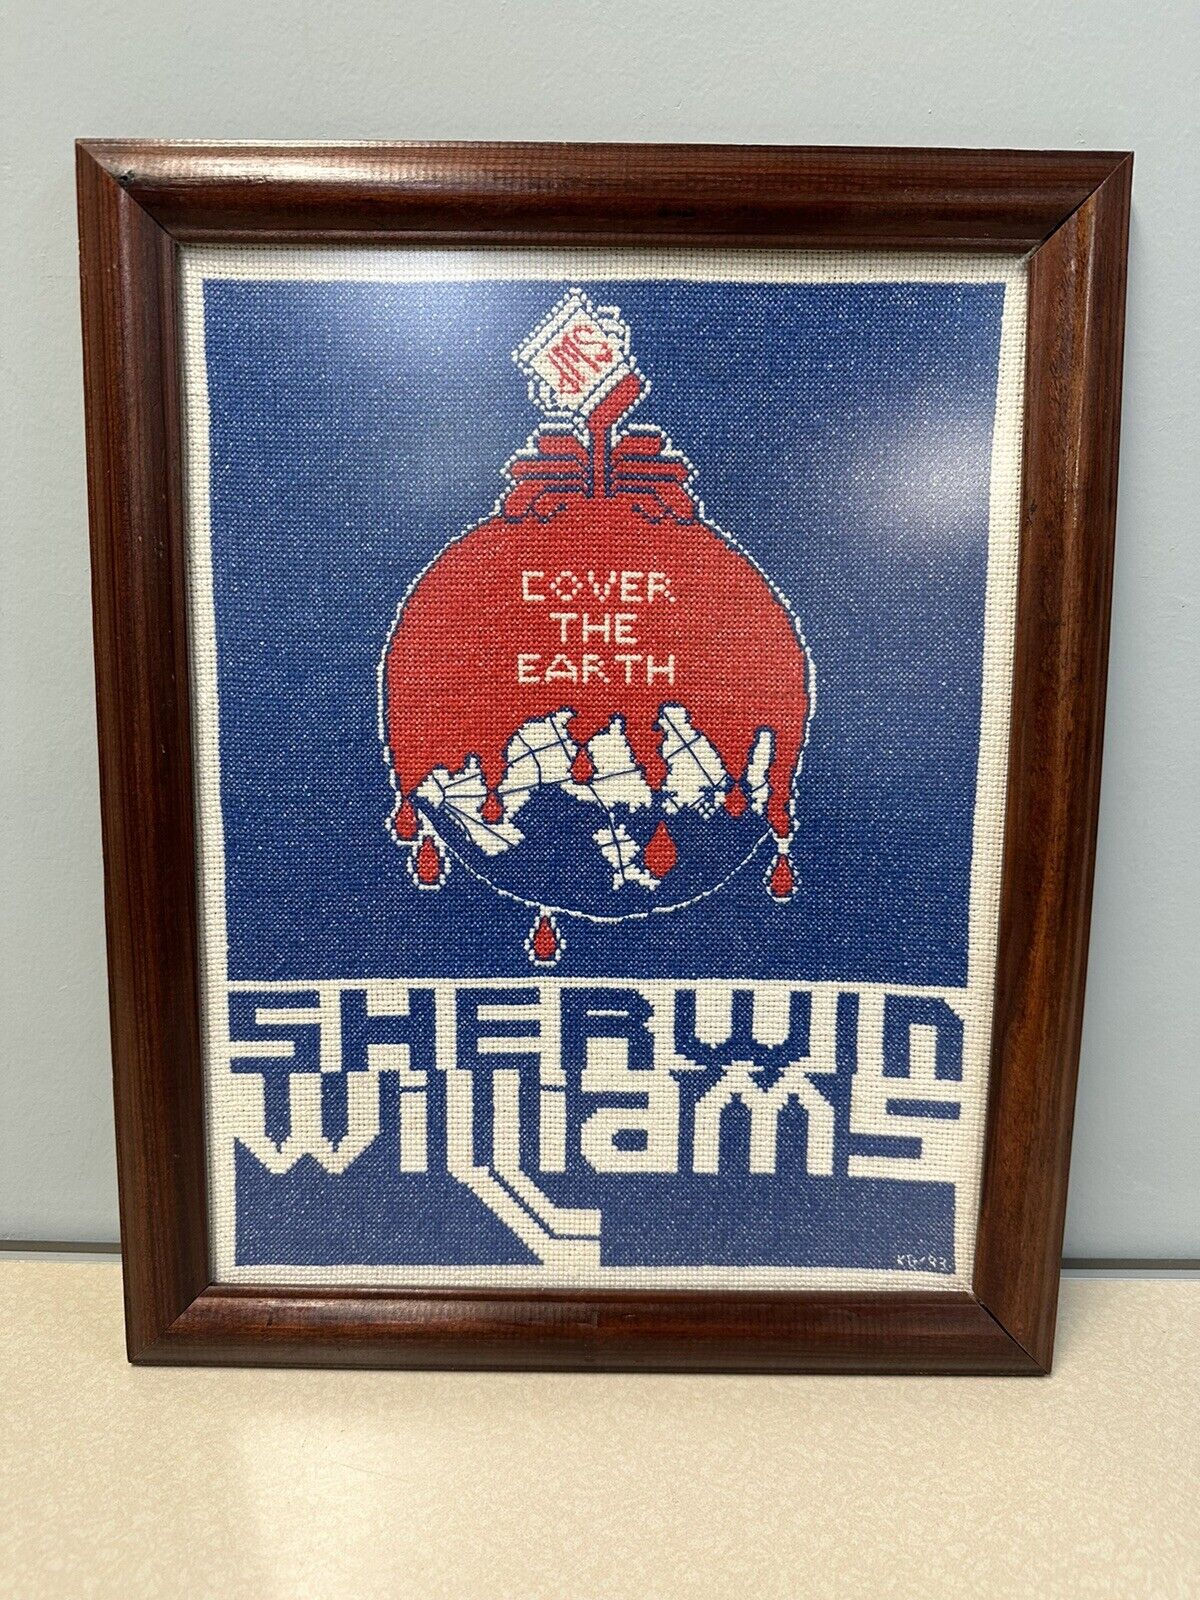 Sherwin Williams Cover The Earth Counter Cross Stitch Vintage Advertising